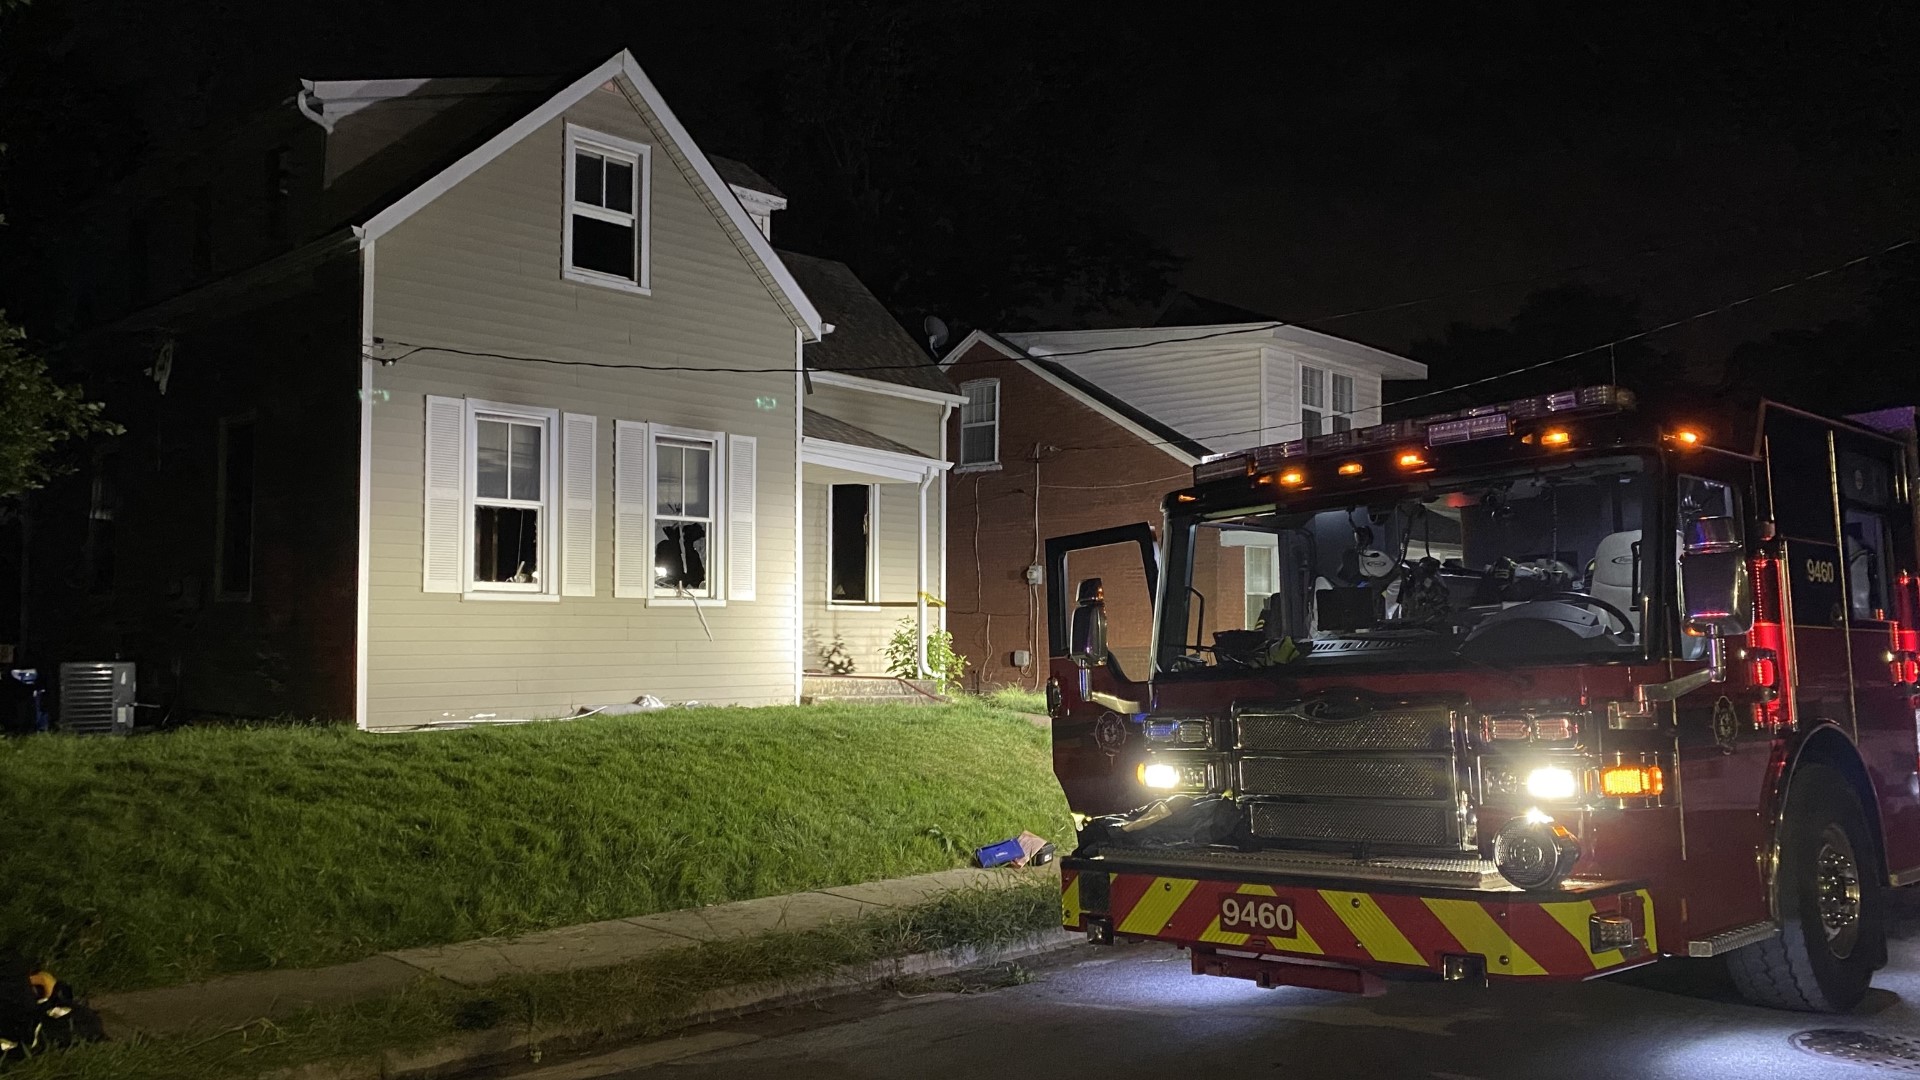 One person died after a Wednesday evening fire at a home in St. Charles.